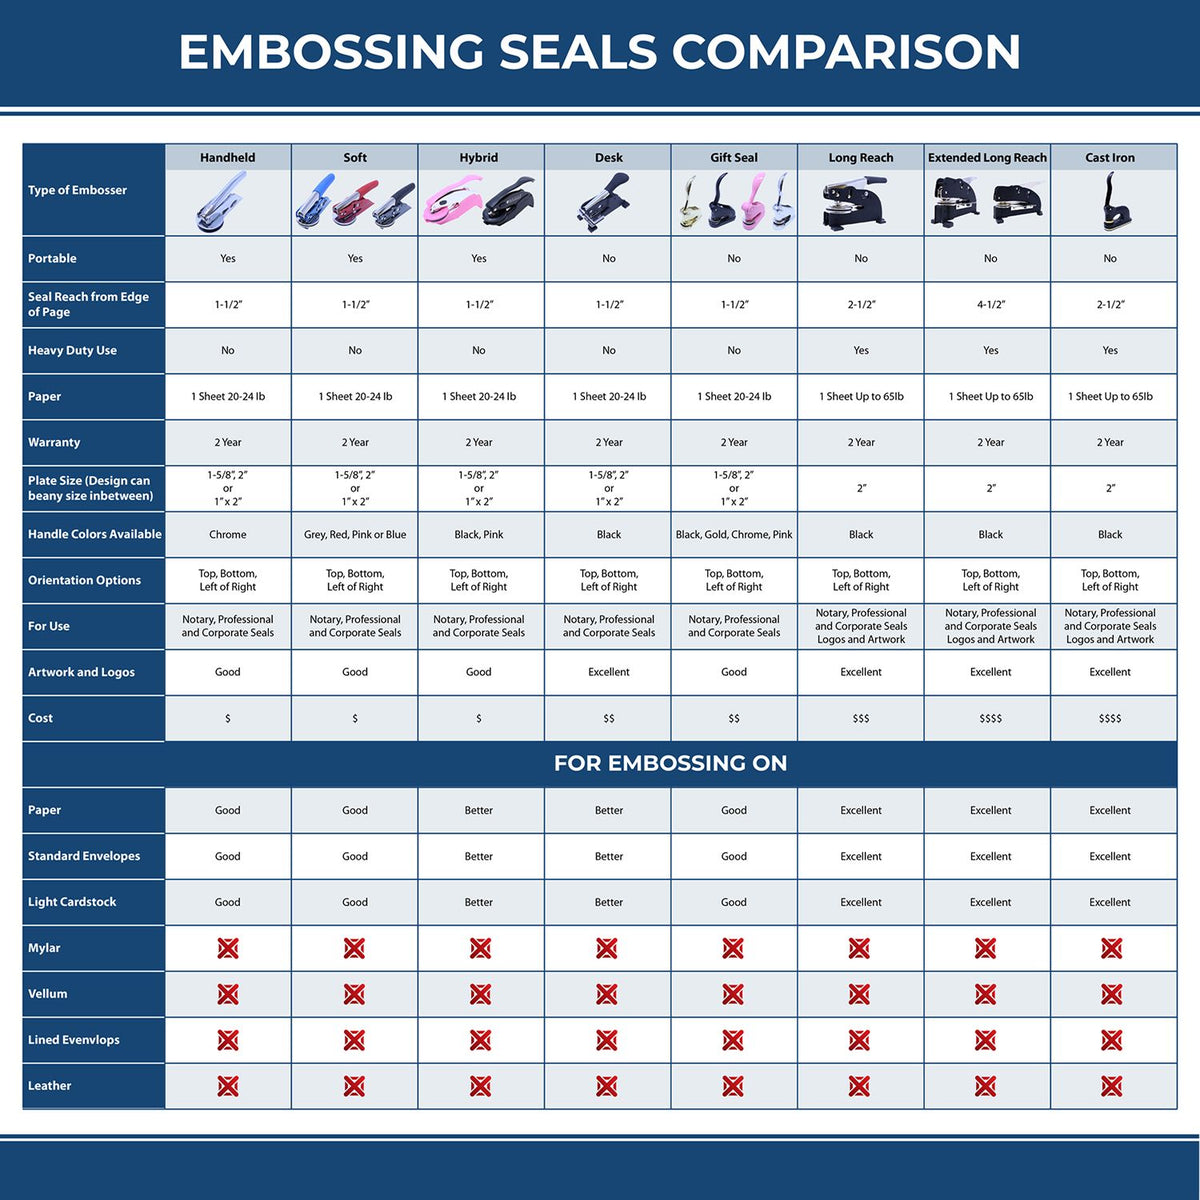 A comparison chart for the different types of mount models available for the Handheld New Jersey Professional Geologist Embosser